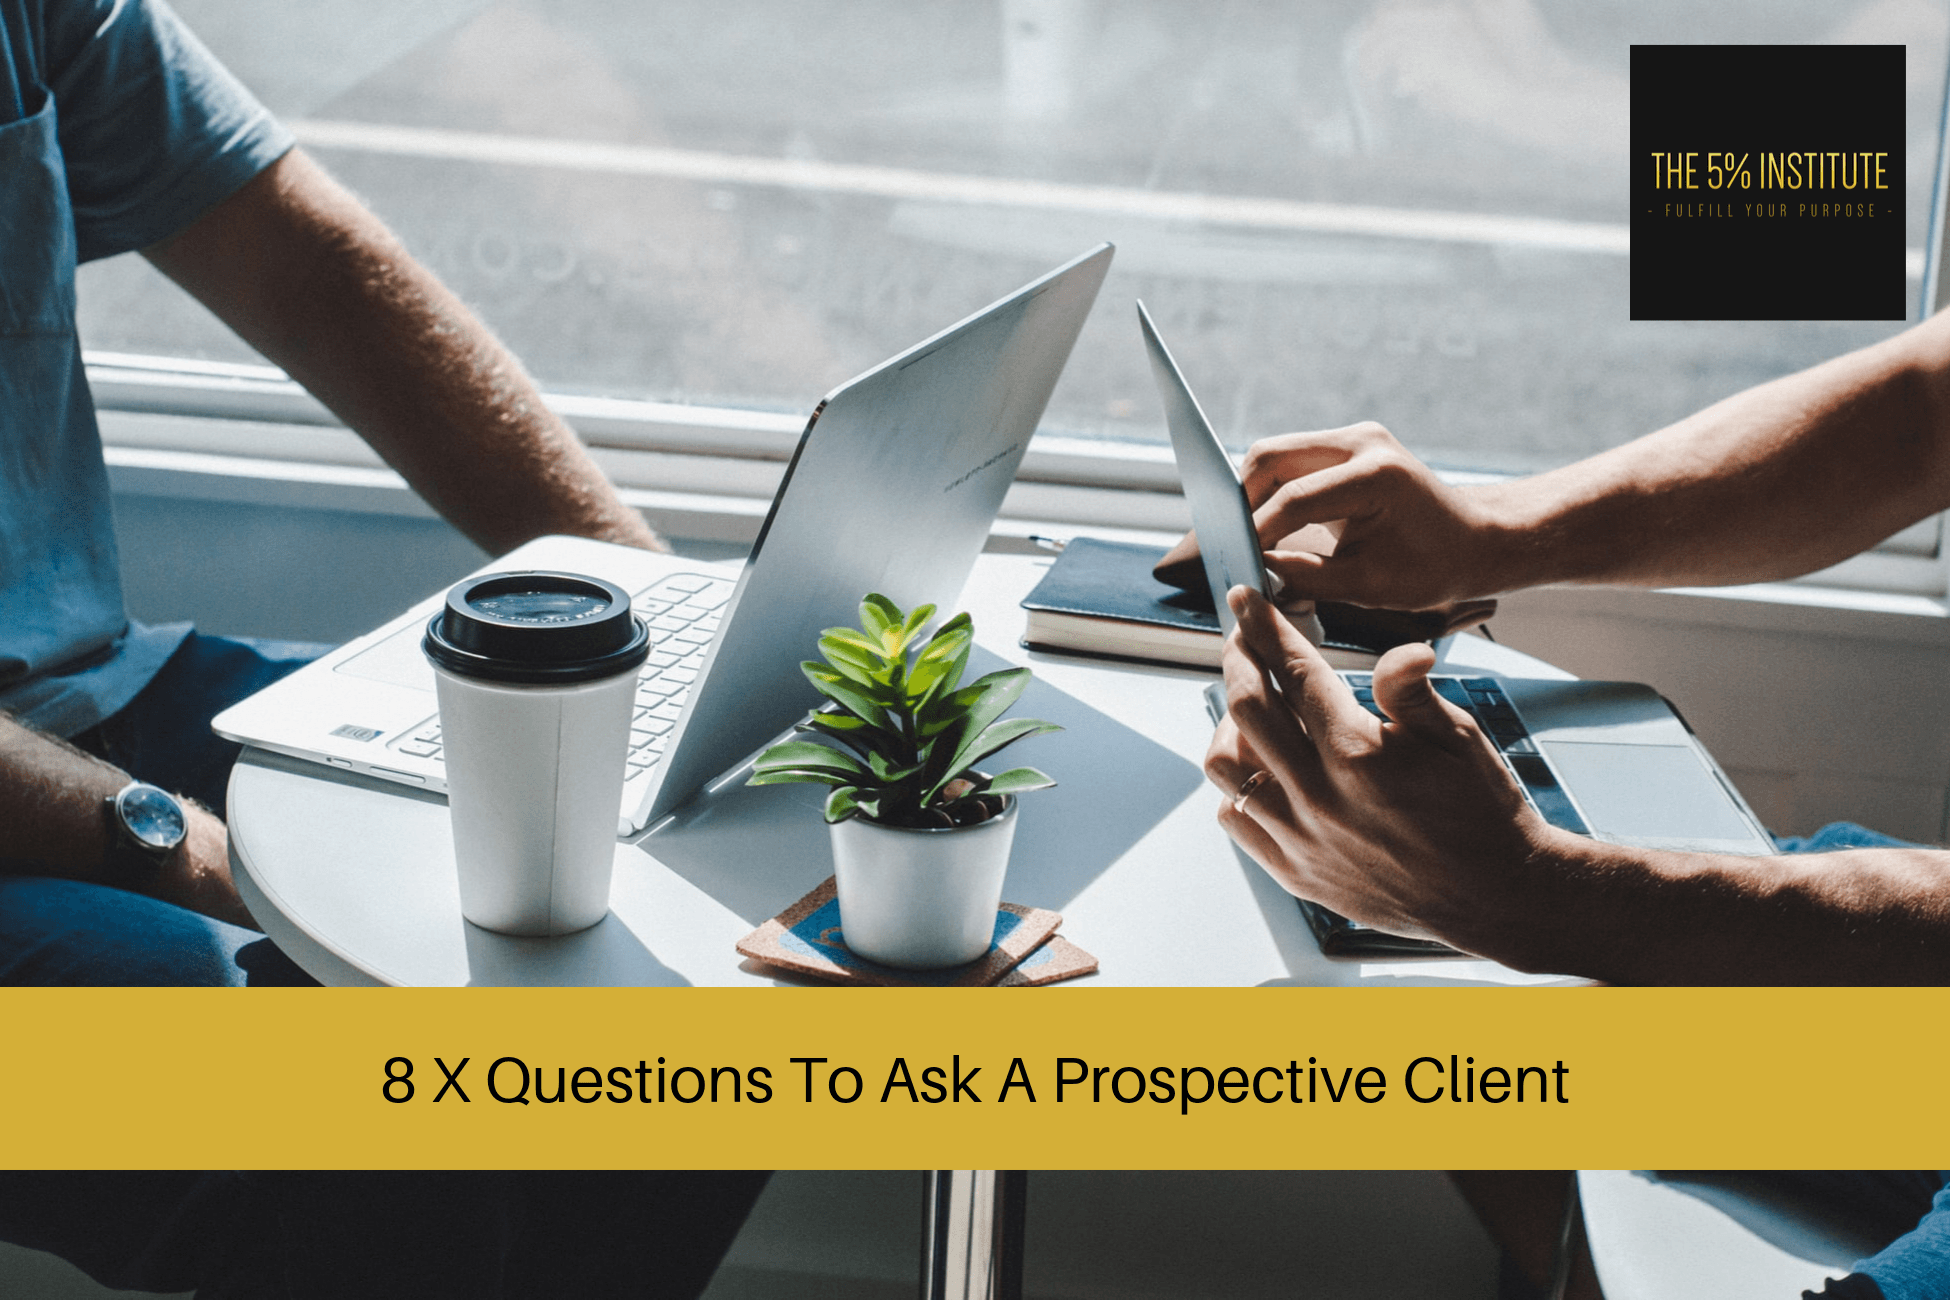 Questions To Ask A Prospective Client